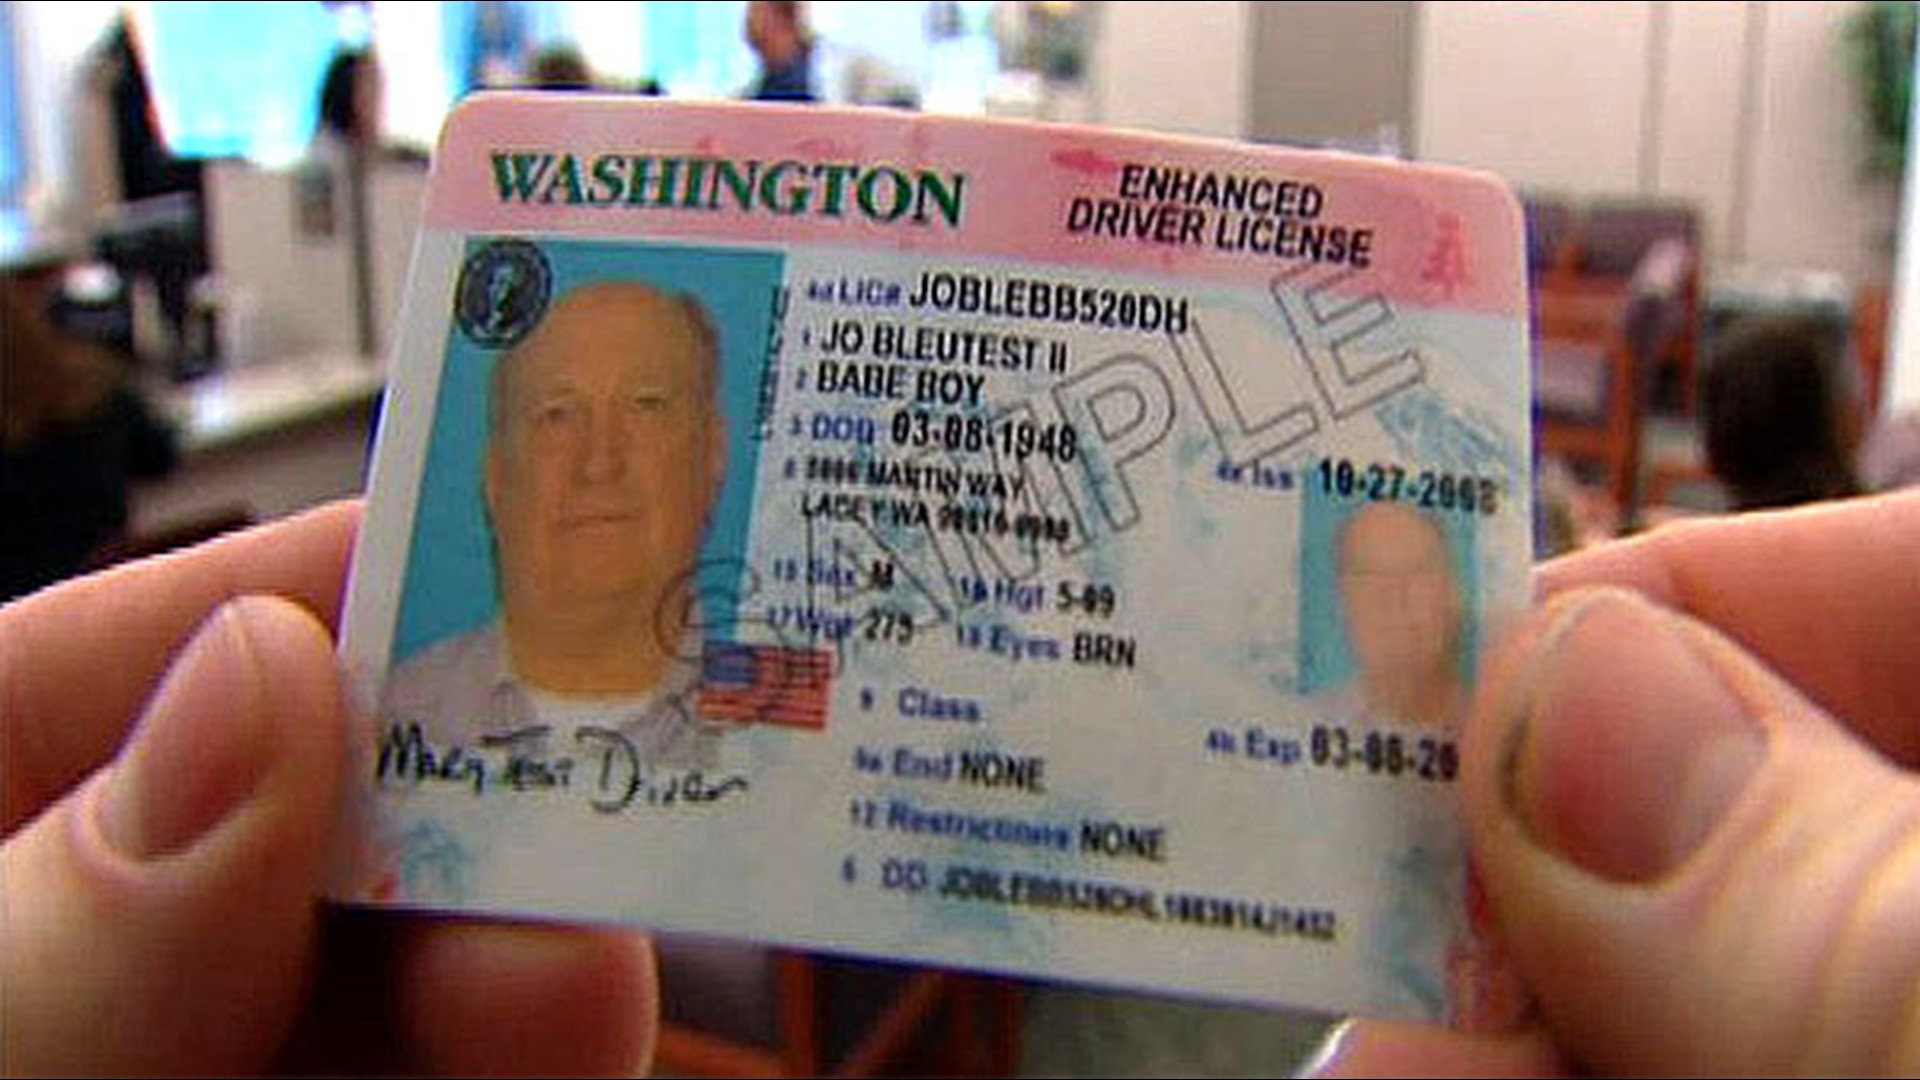 Fees will go from $32 to $56 for Washington's enhanced driver's licenses. Those special licenses allow travel by car into Canada without a passport.